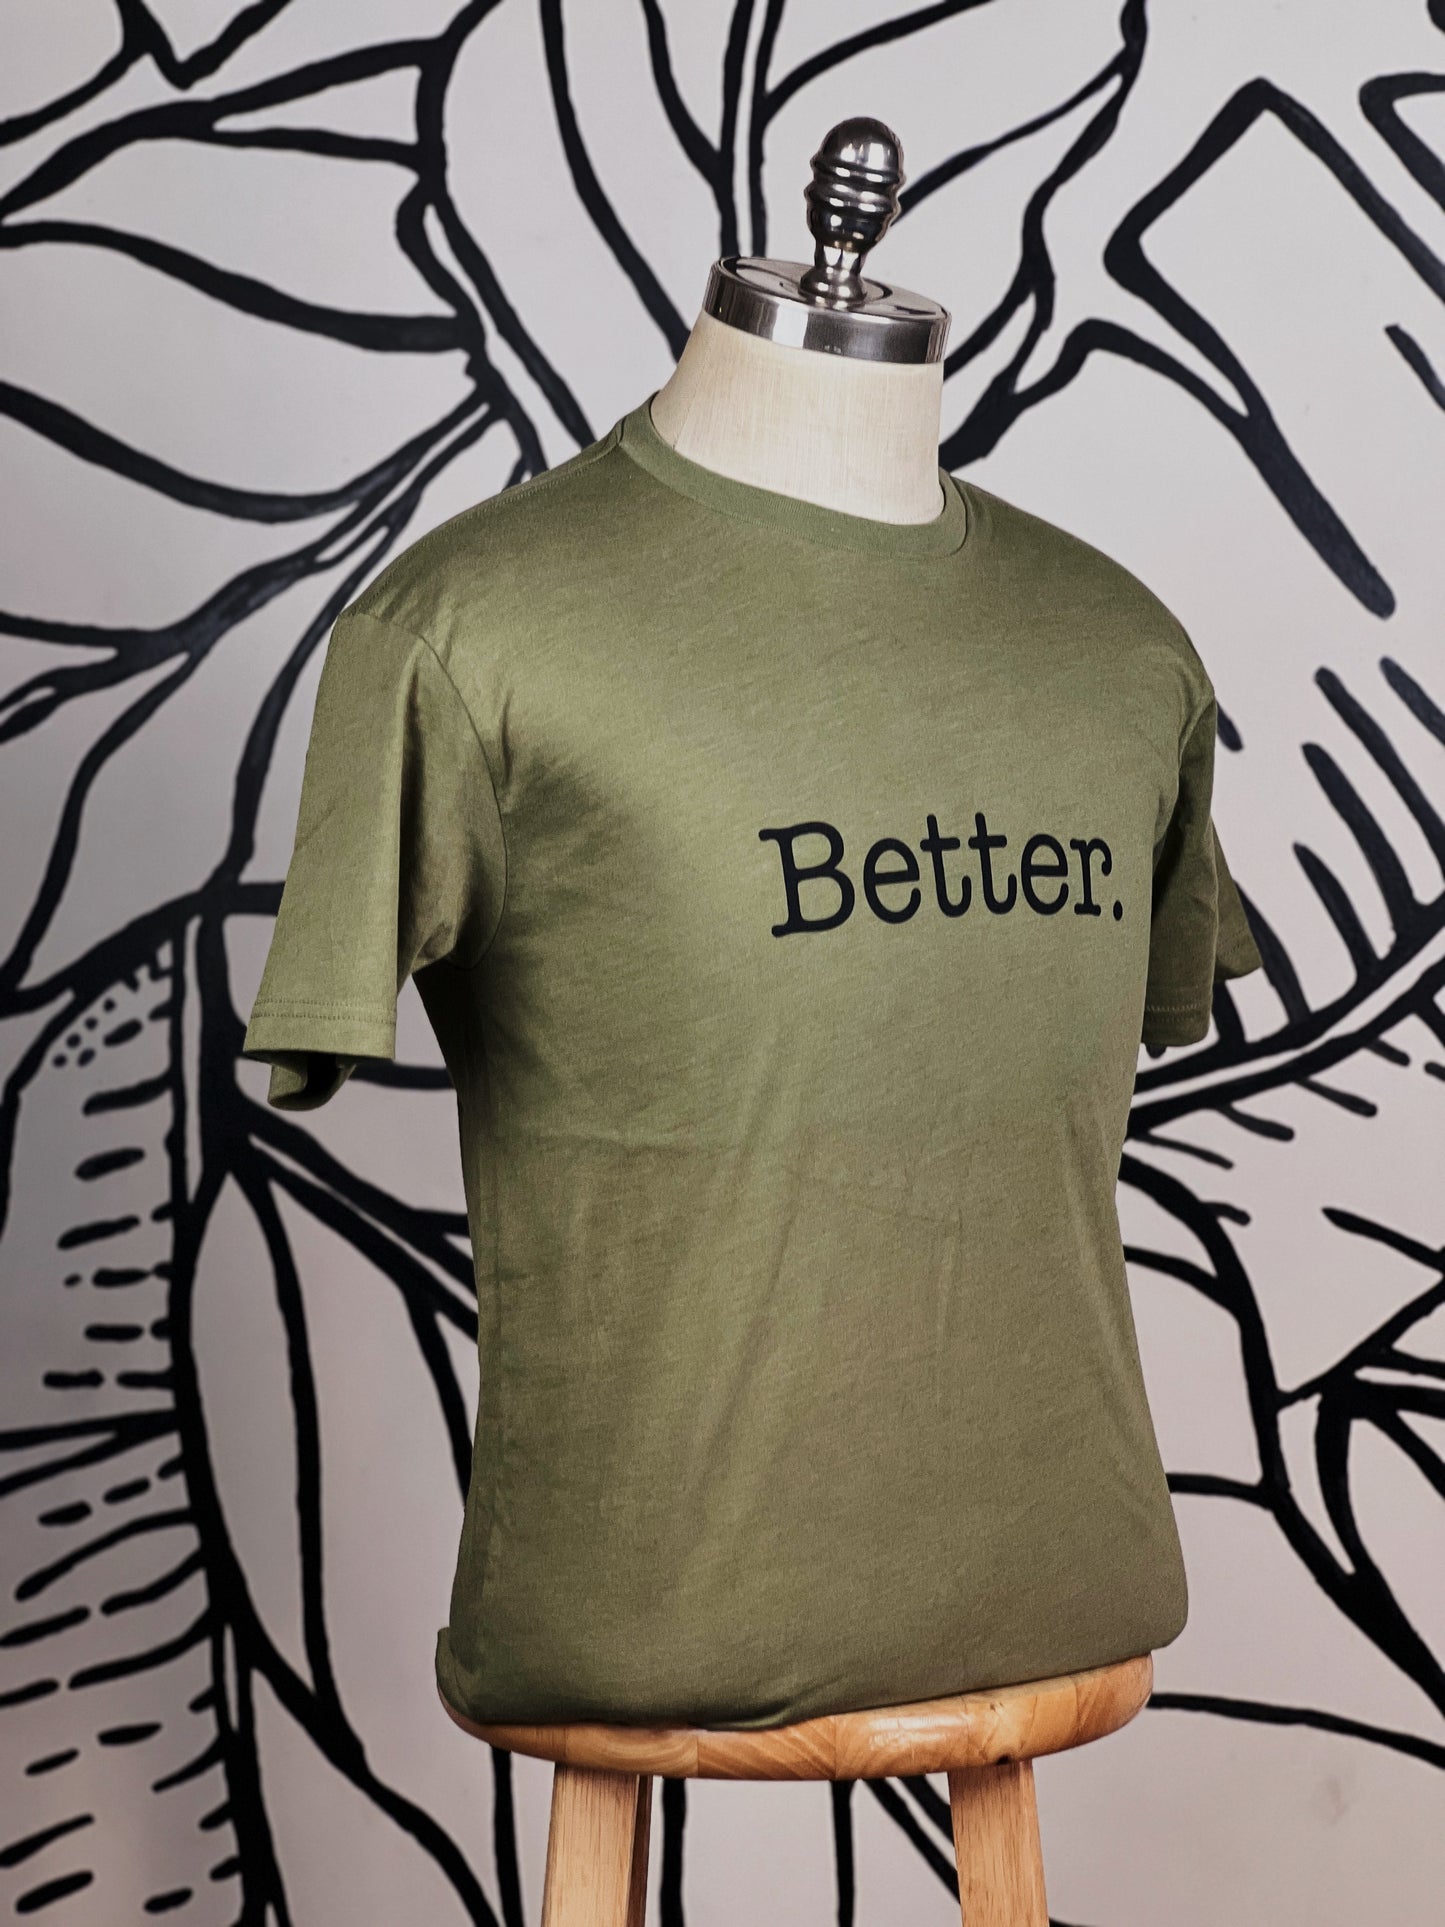 Olive/OD Green “Better” Tee